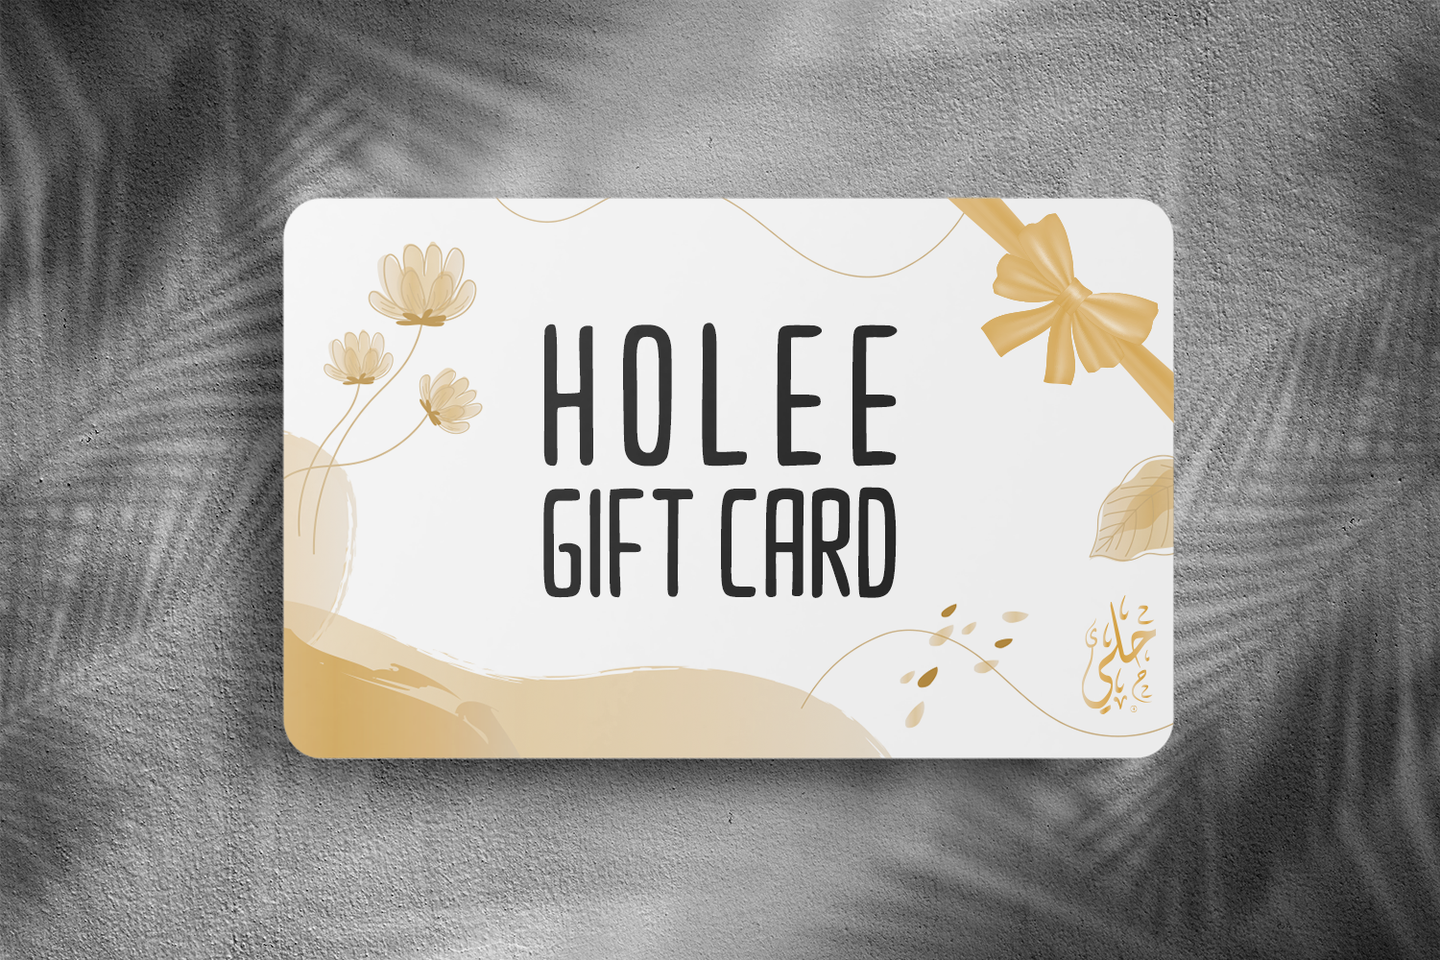 Holee gift card